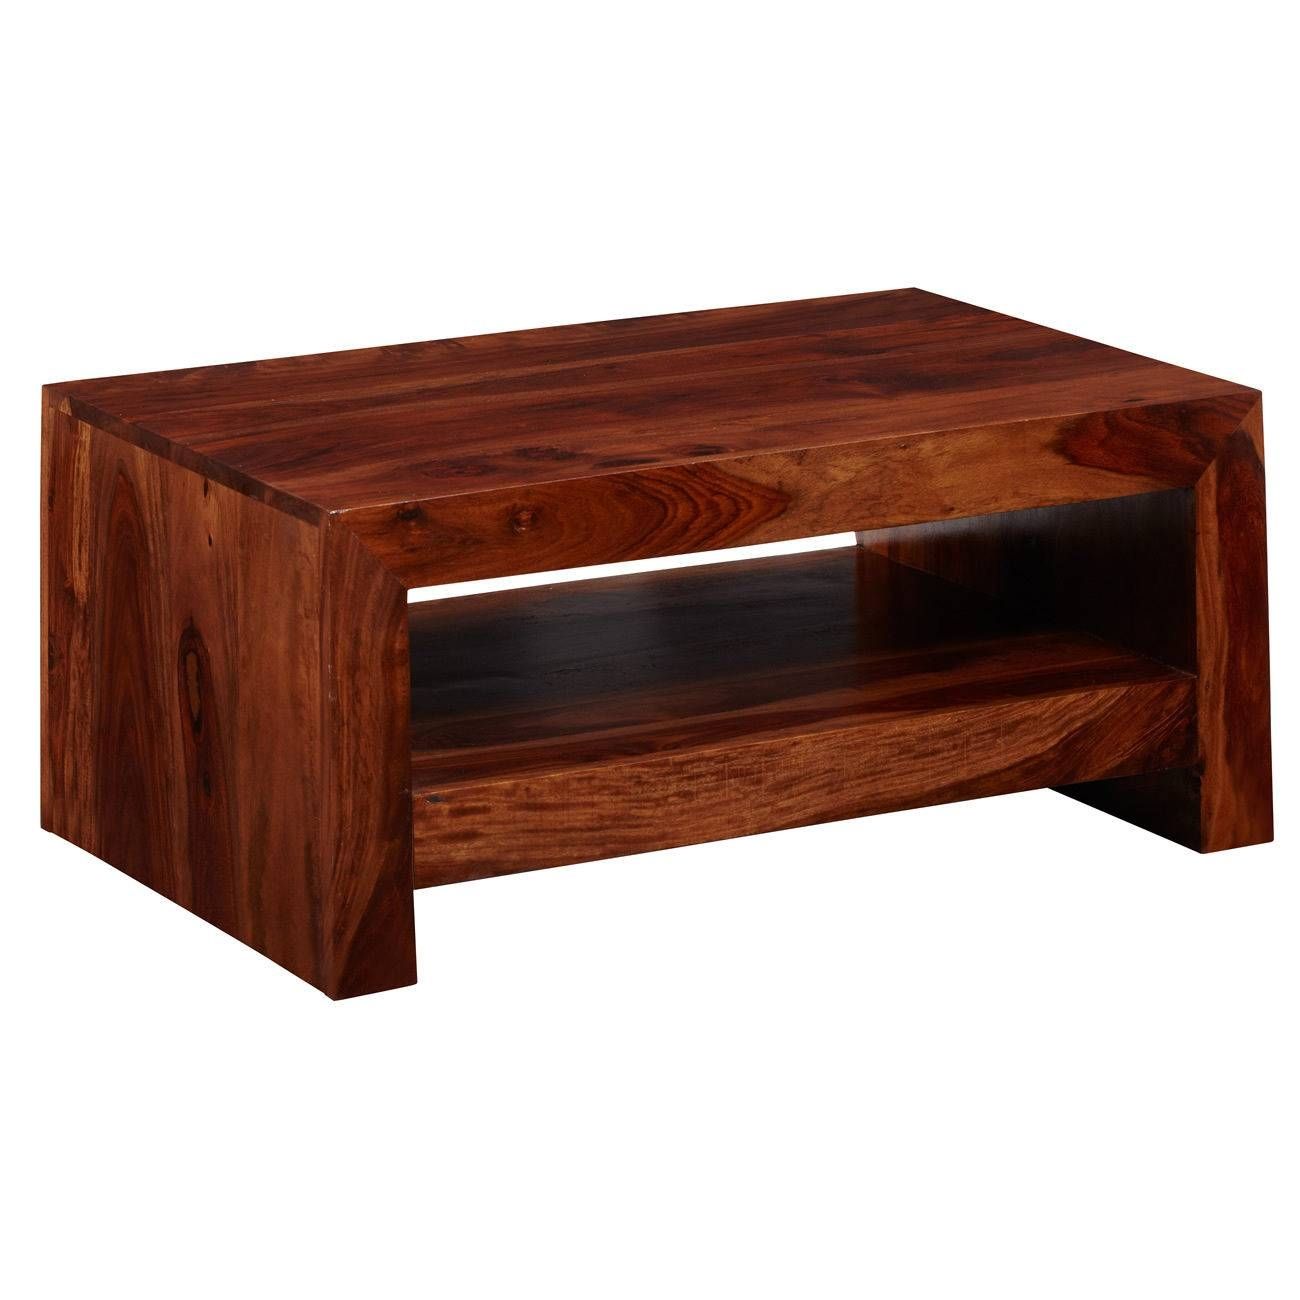 Coffee Table: Marvelous Brown Coffee Table Ideas Cheap Brown With Regard To Dark Brown Coffee Tables (View 11 of 30)